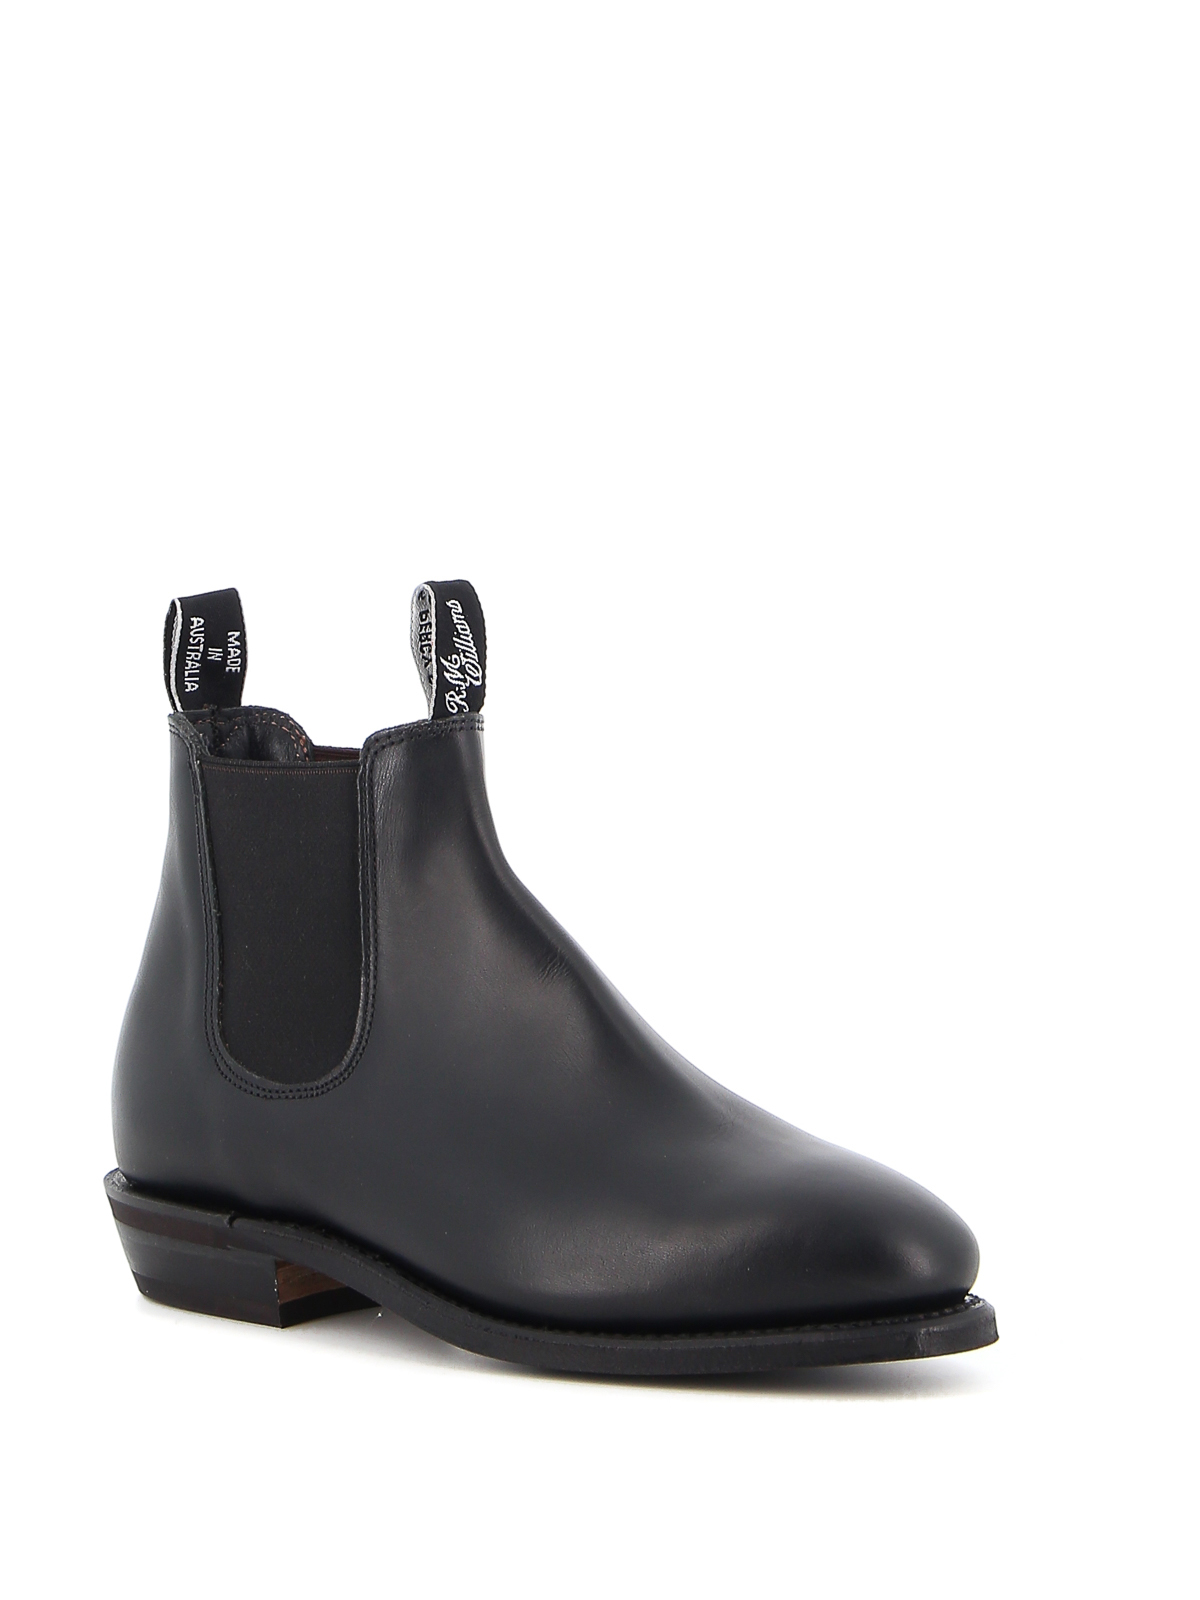 Ankle boots R.M. Williams - Adelaide Chelsea boots - B550Y02DDDIBLACK